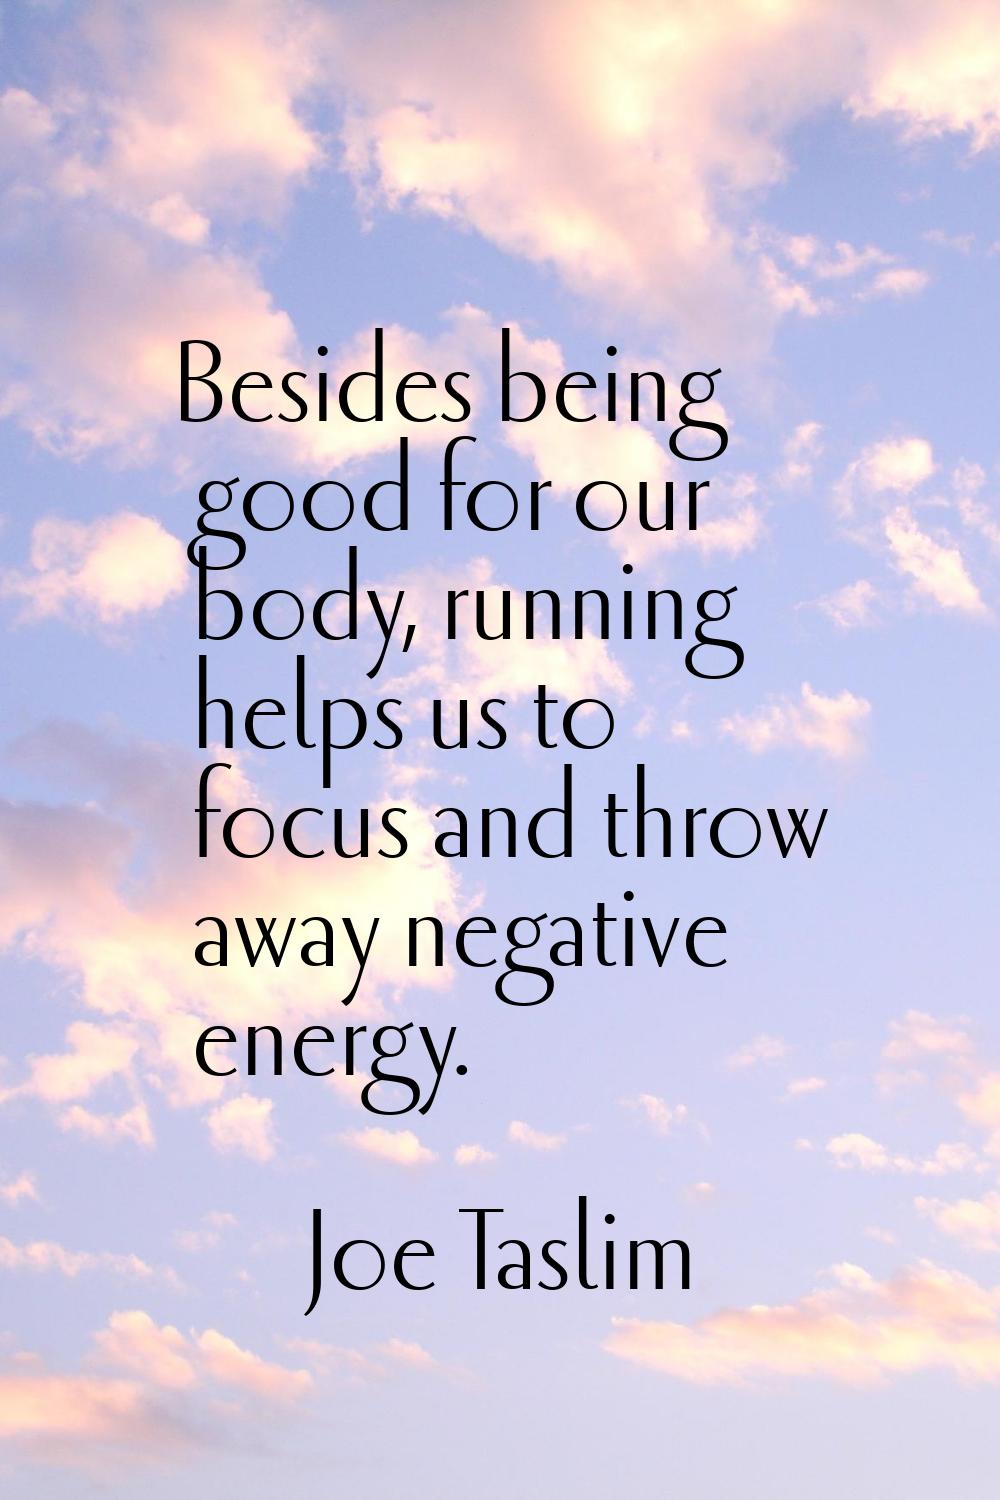 Besides being good for our body, running helps us to focus and throw away negative energy.